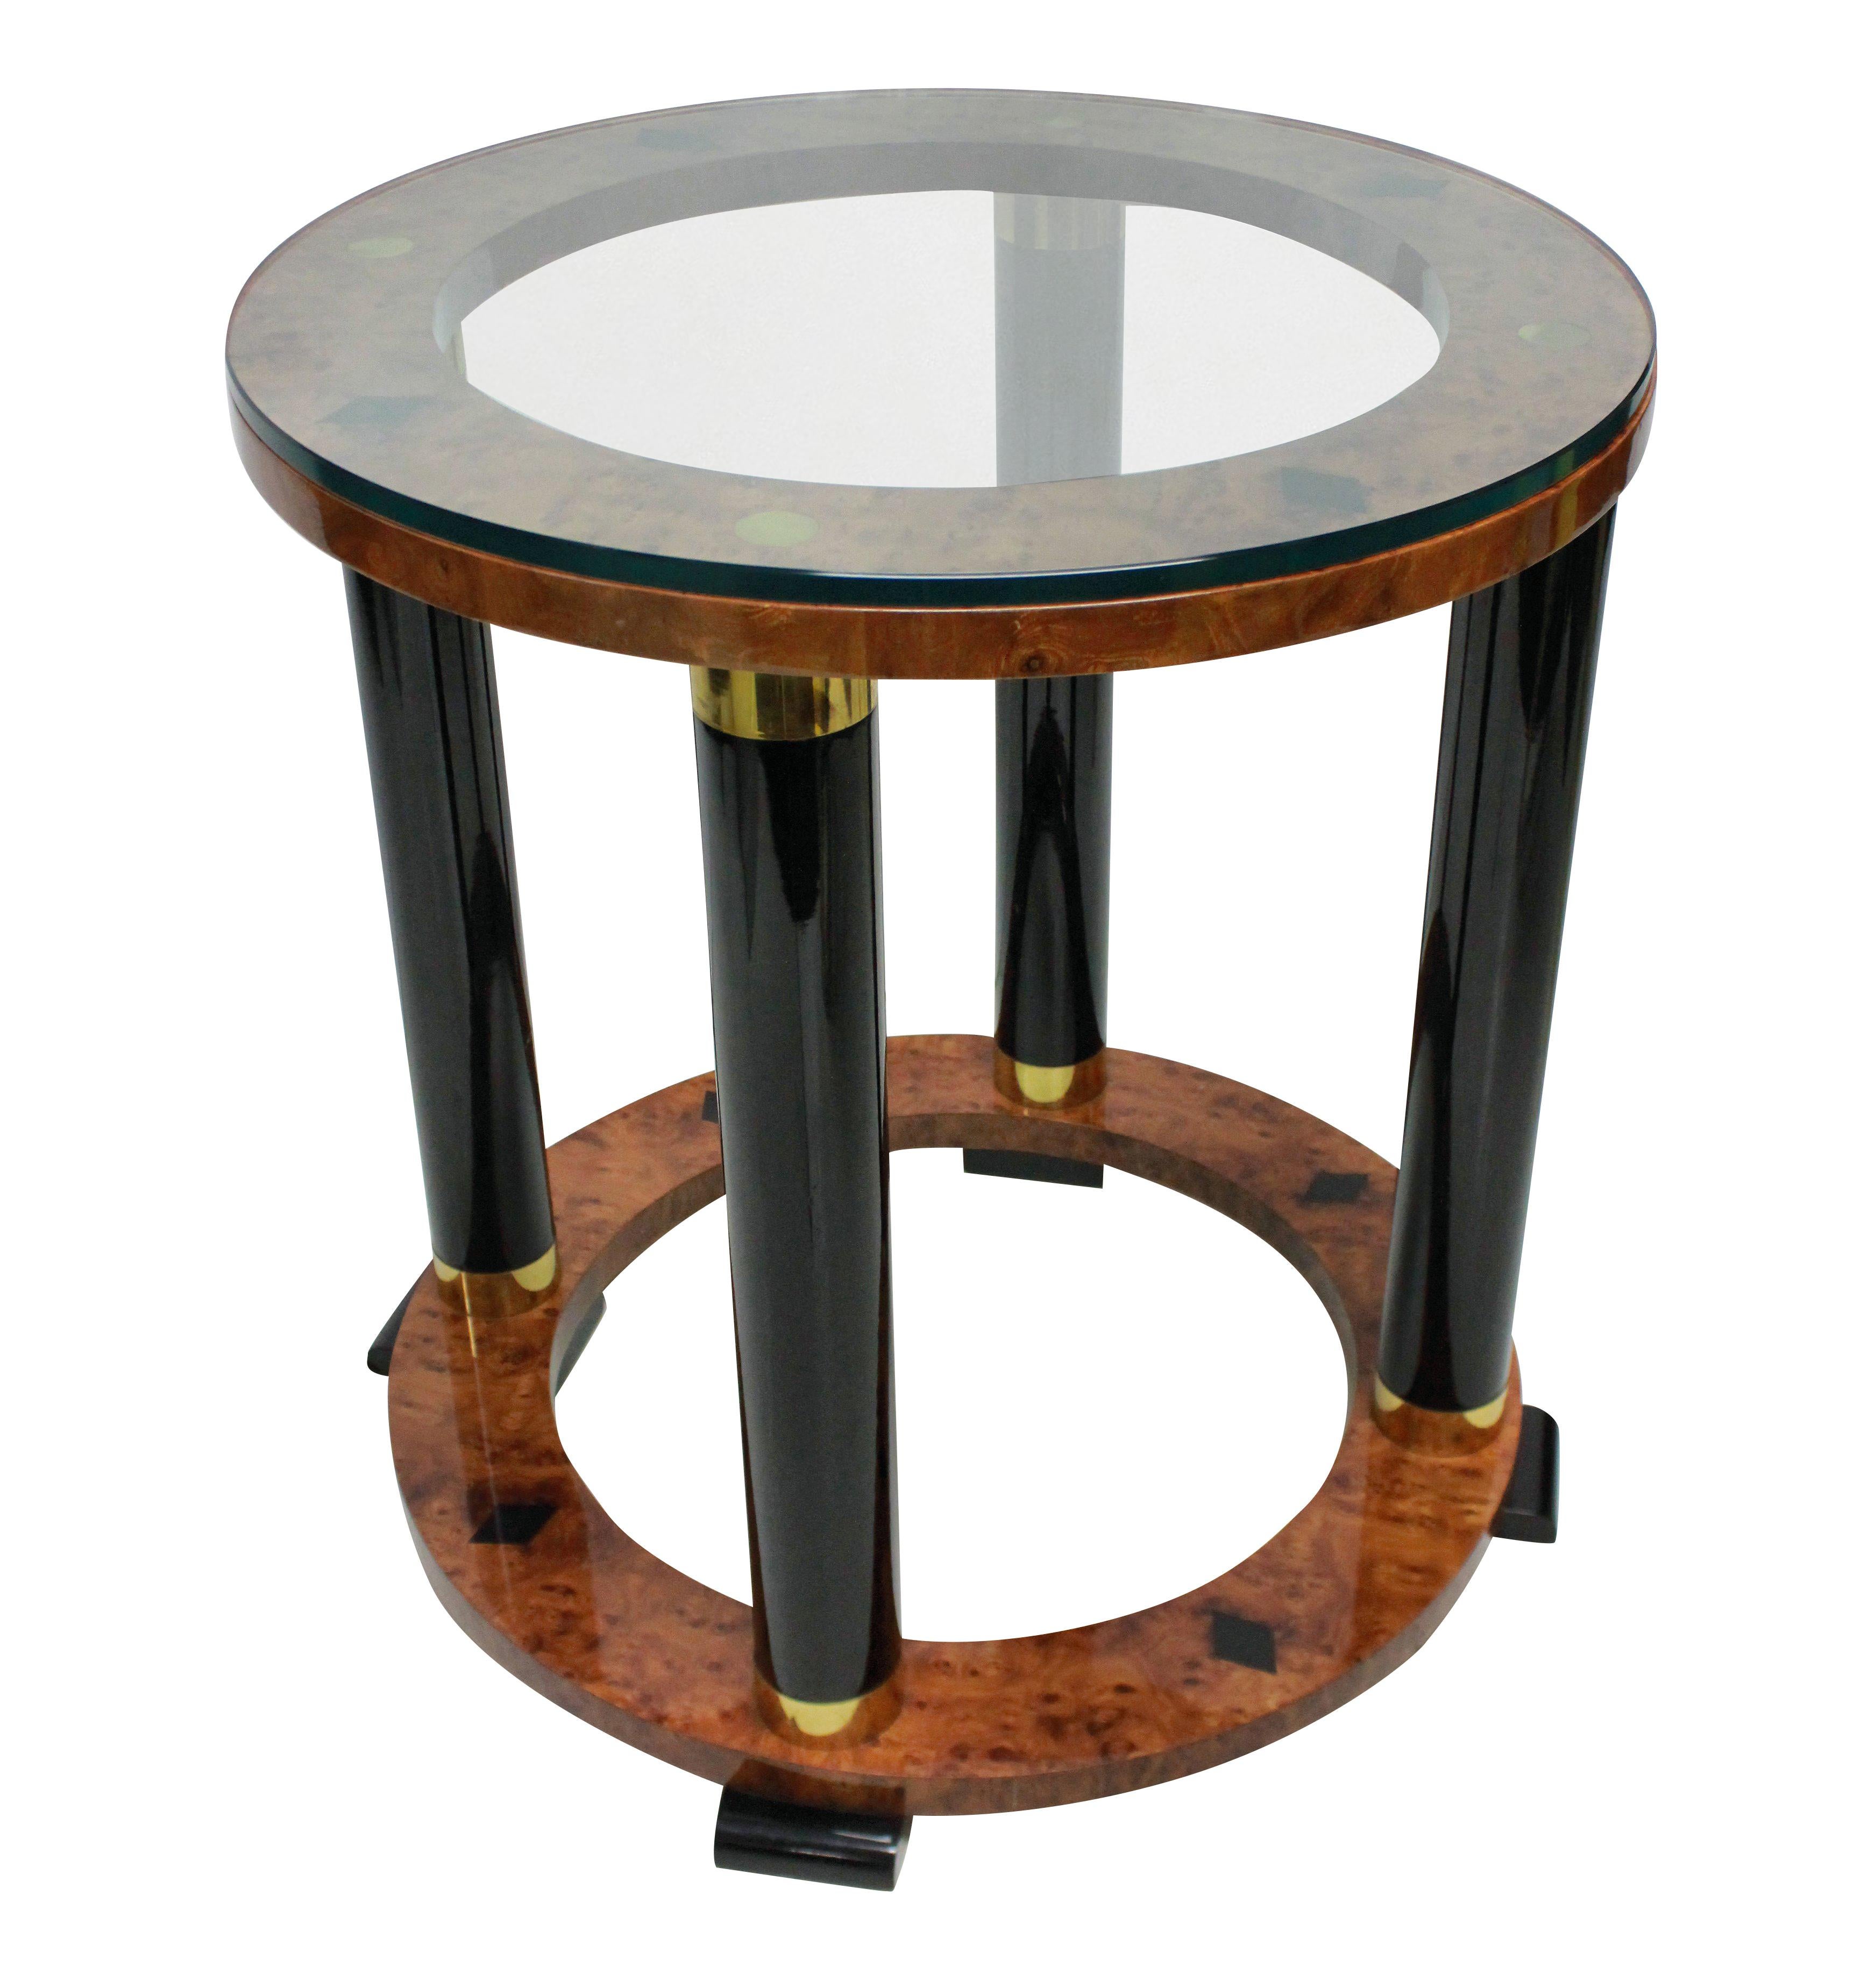 An Italian neoclassical circular side table in lacquered walnut and ebony with brass inlay and a glass top.